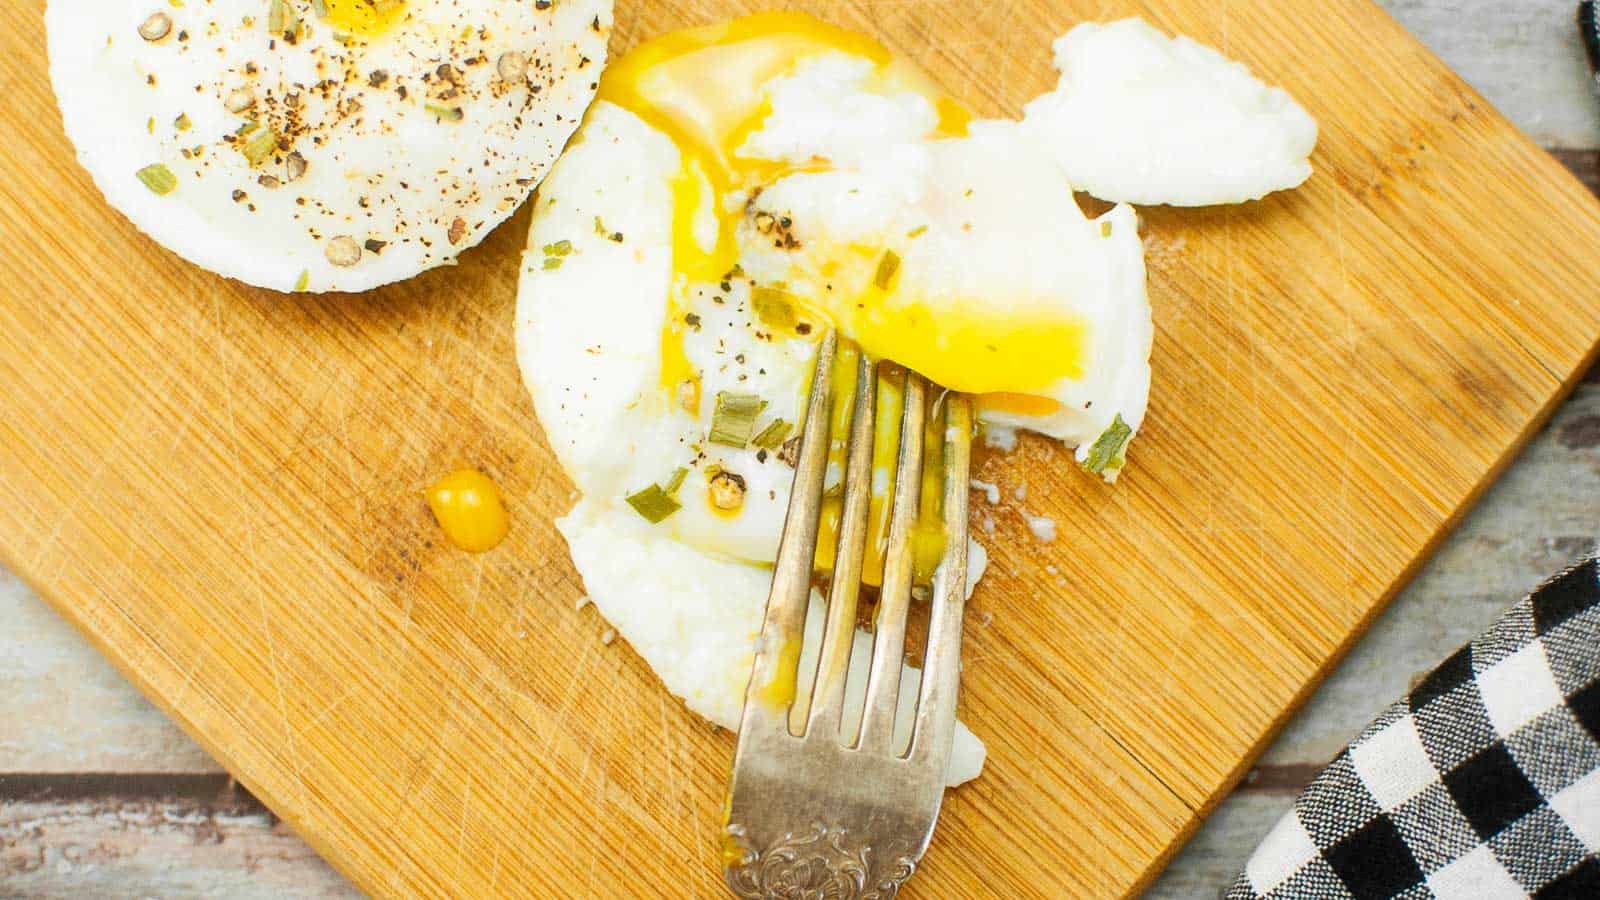 Poached eggs on a wooden cutting board with a fork.